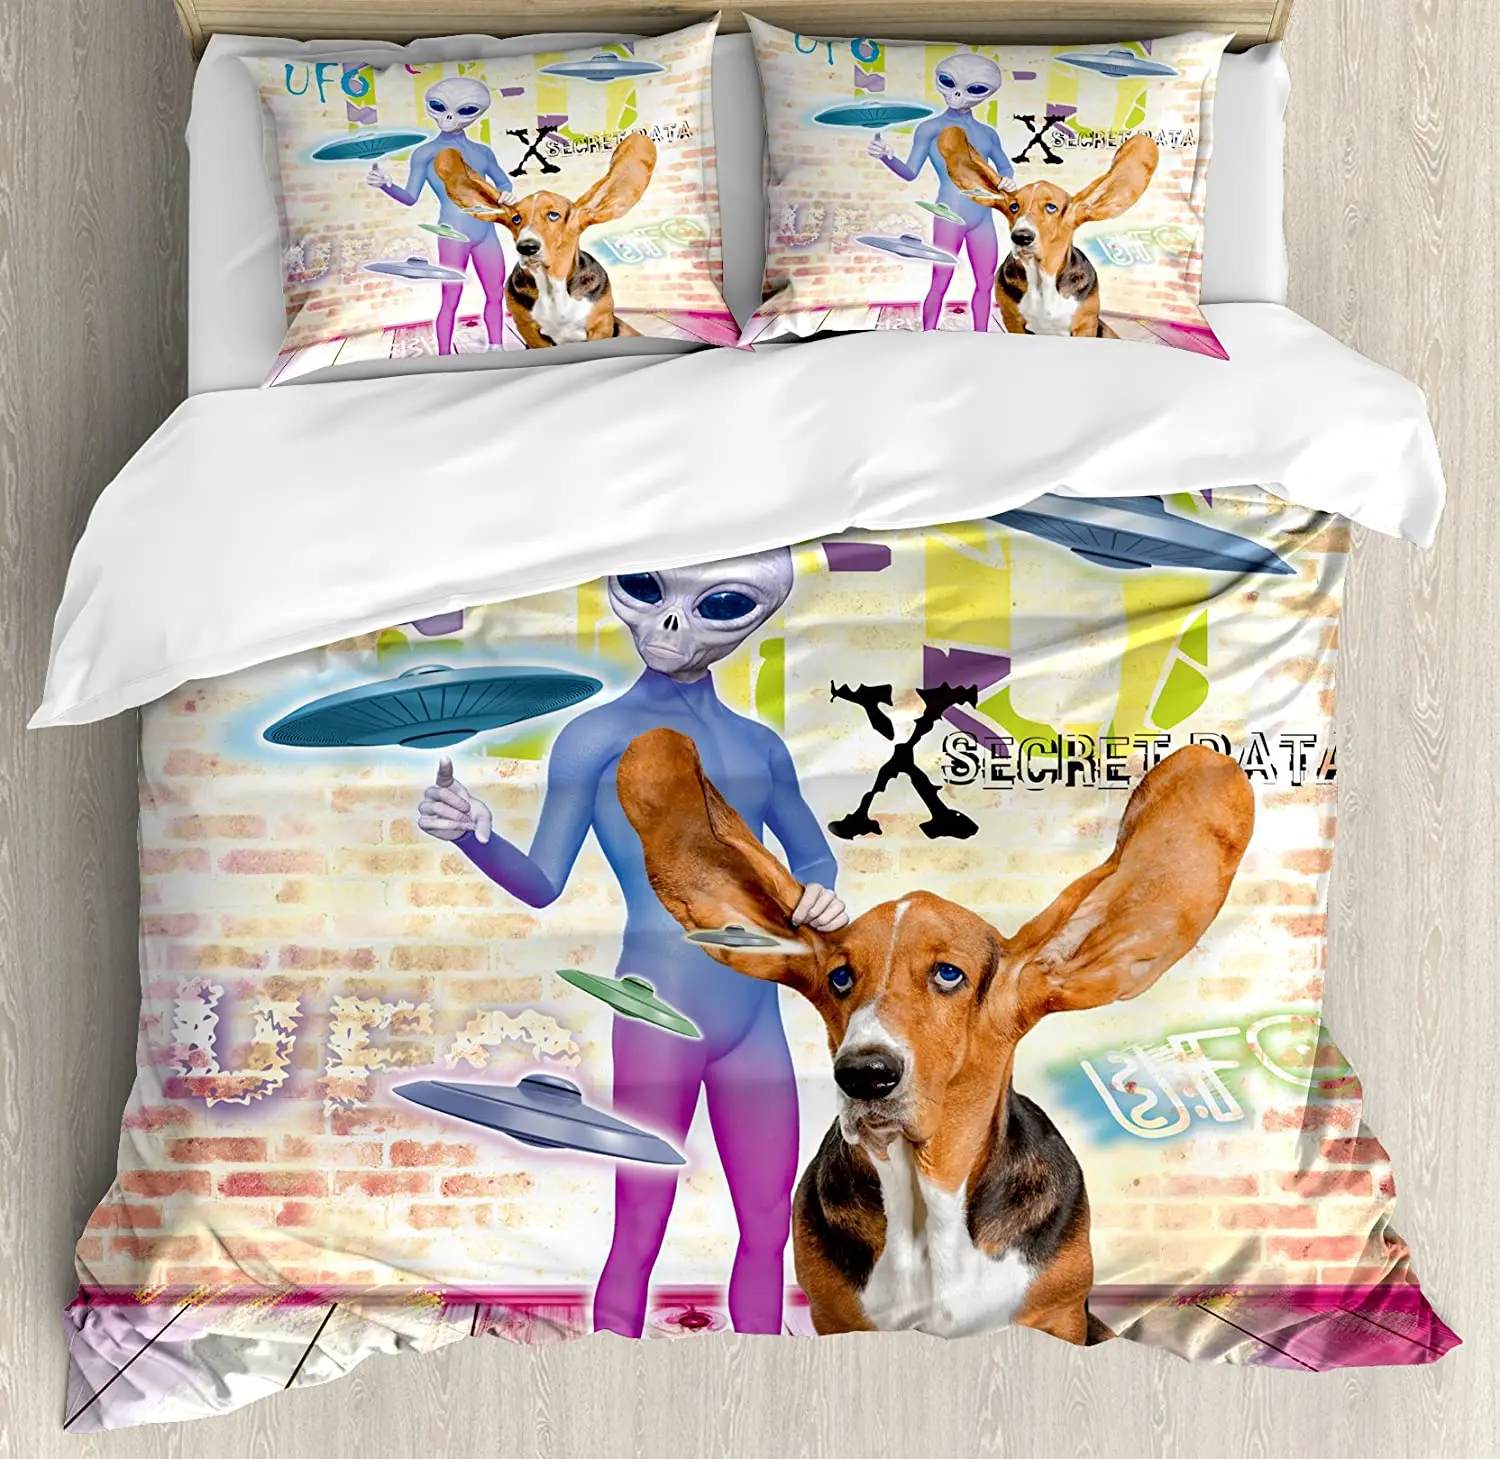 

Outer Space Bedding Set Alien and Cute Dog with Giant Ears 3pcs Duvet Cover Set Bed Set Quilt Cover Pillow Case Comforter Cover